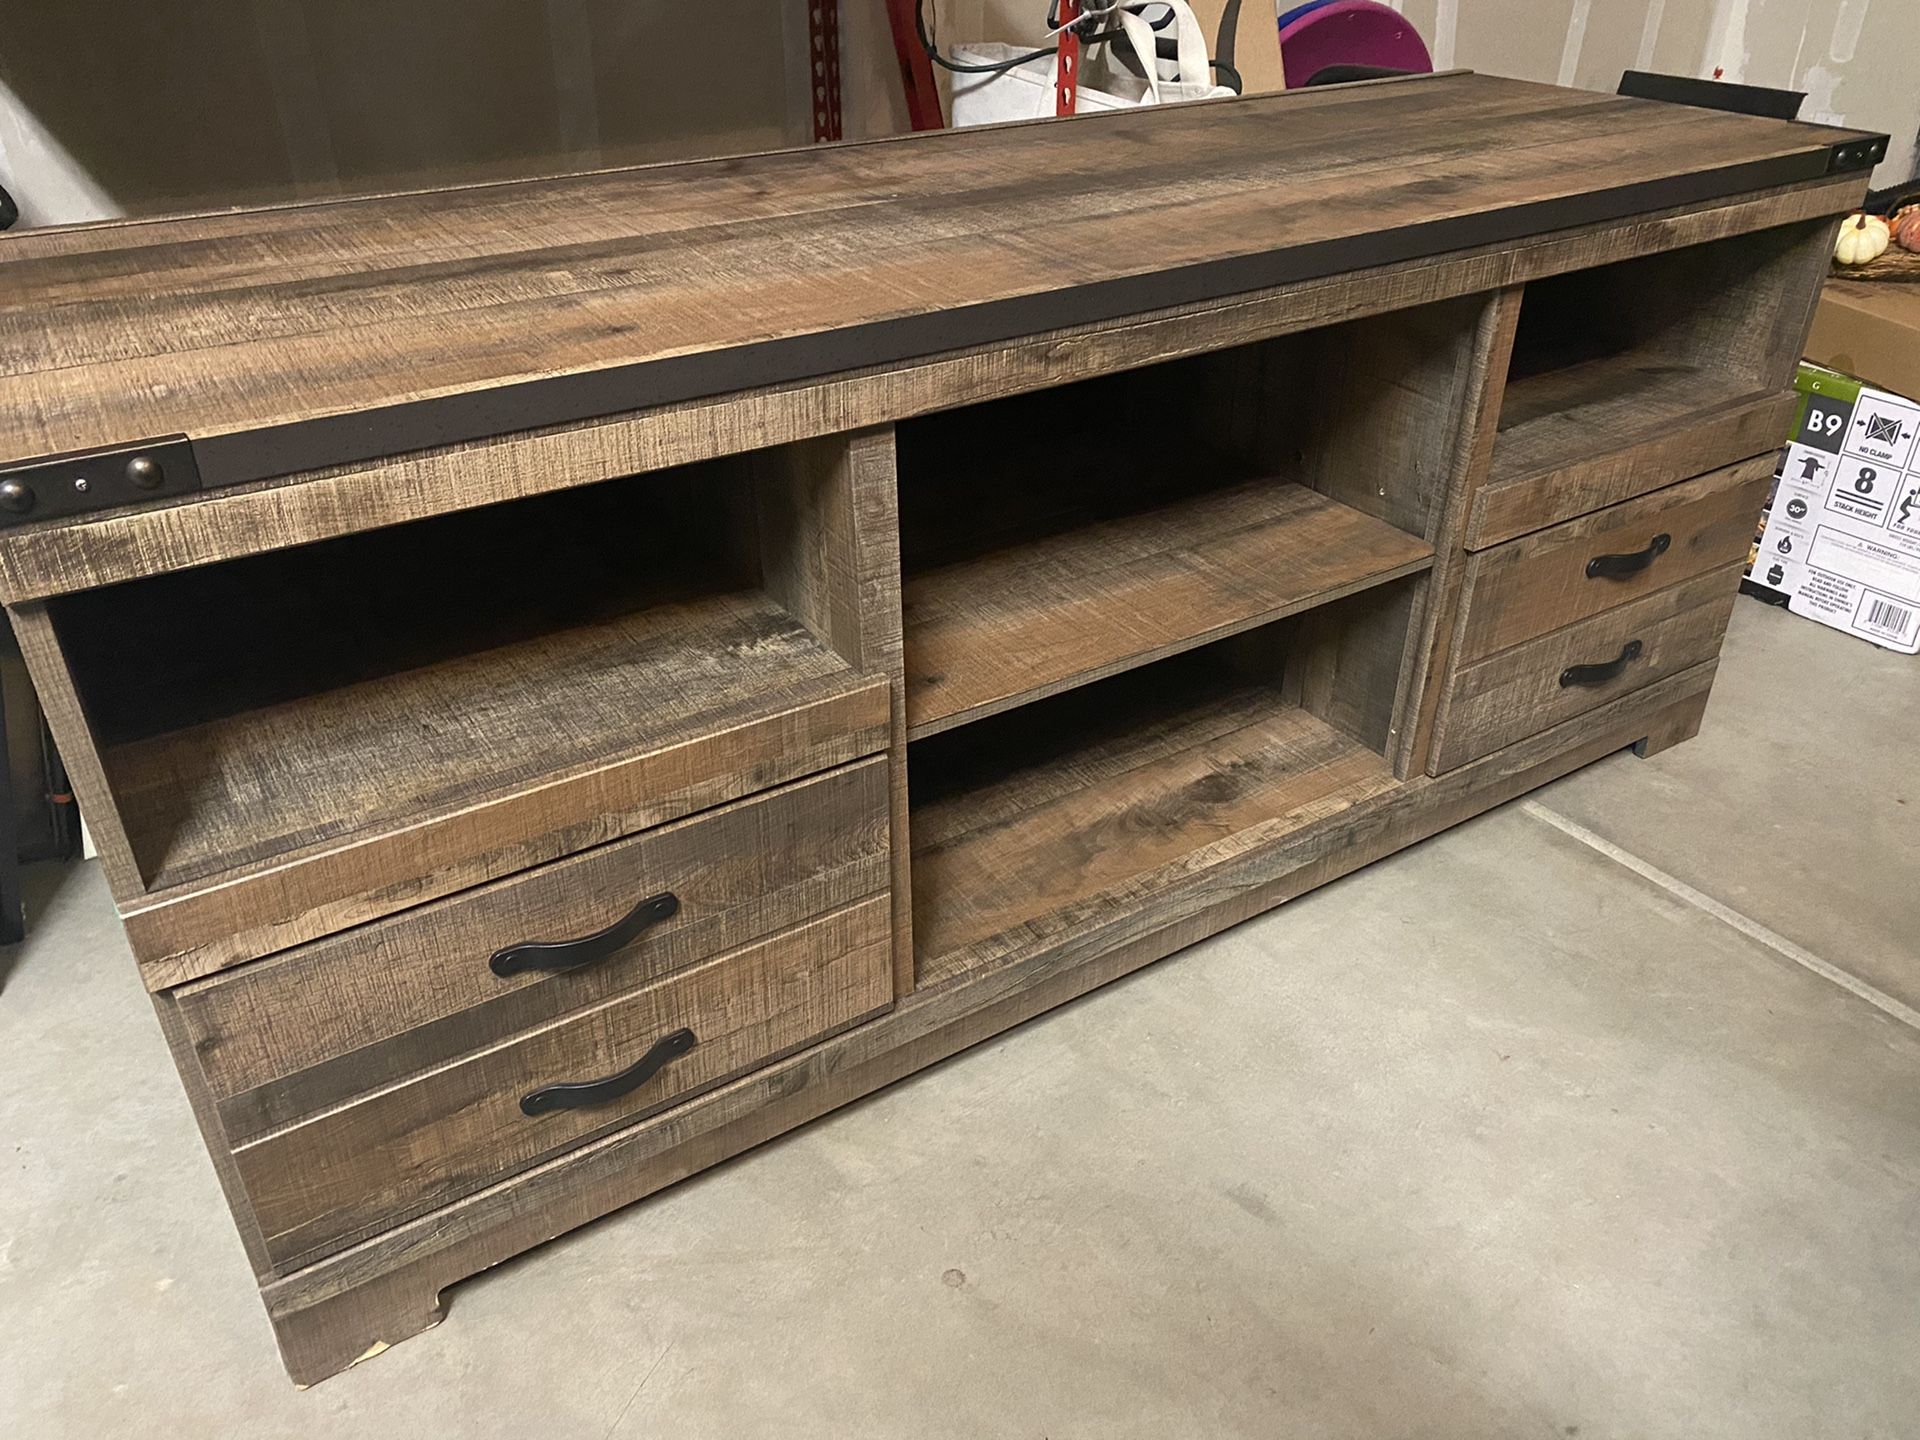 TV stand - distressed wood/farmhouse look